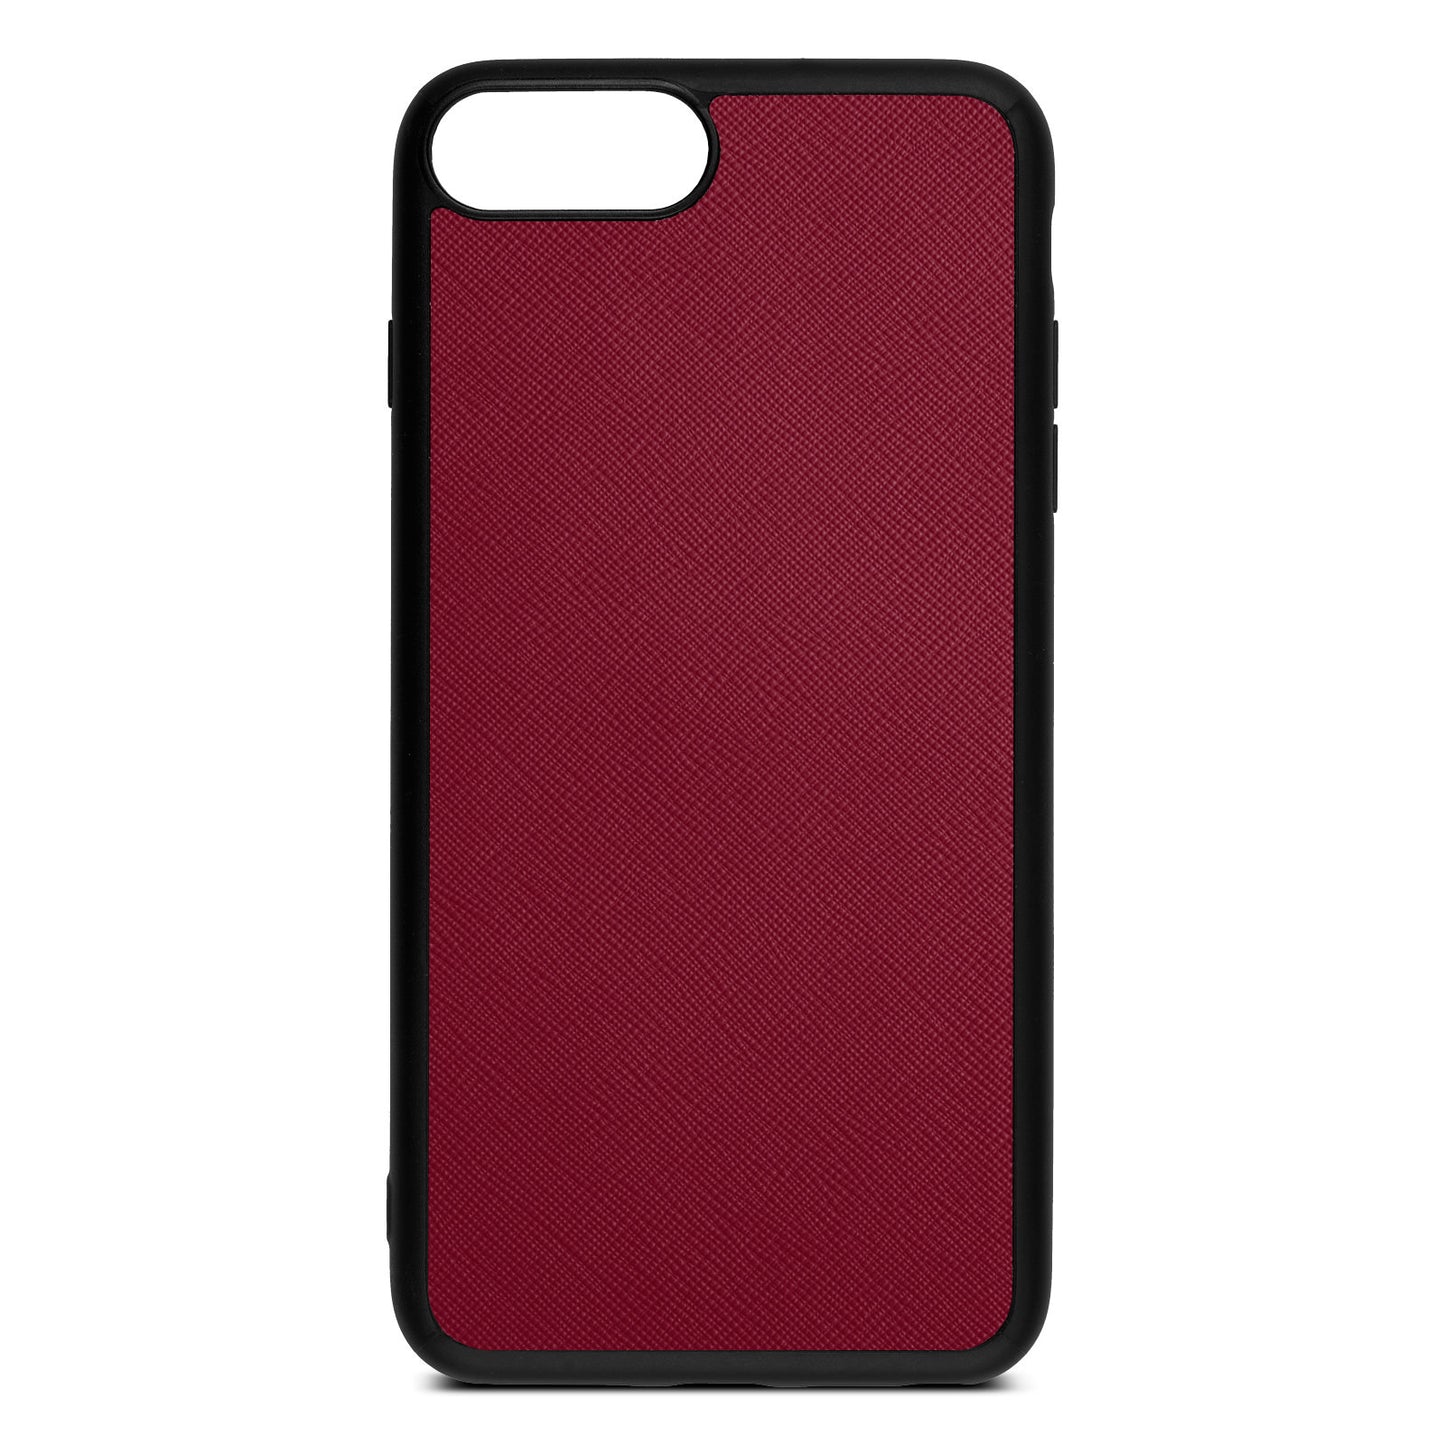 Blank Personalised Dark Red Saffiano Leather iPhone 8 Plus Case